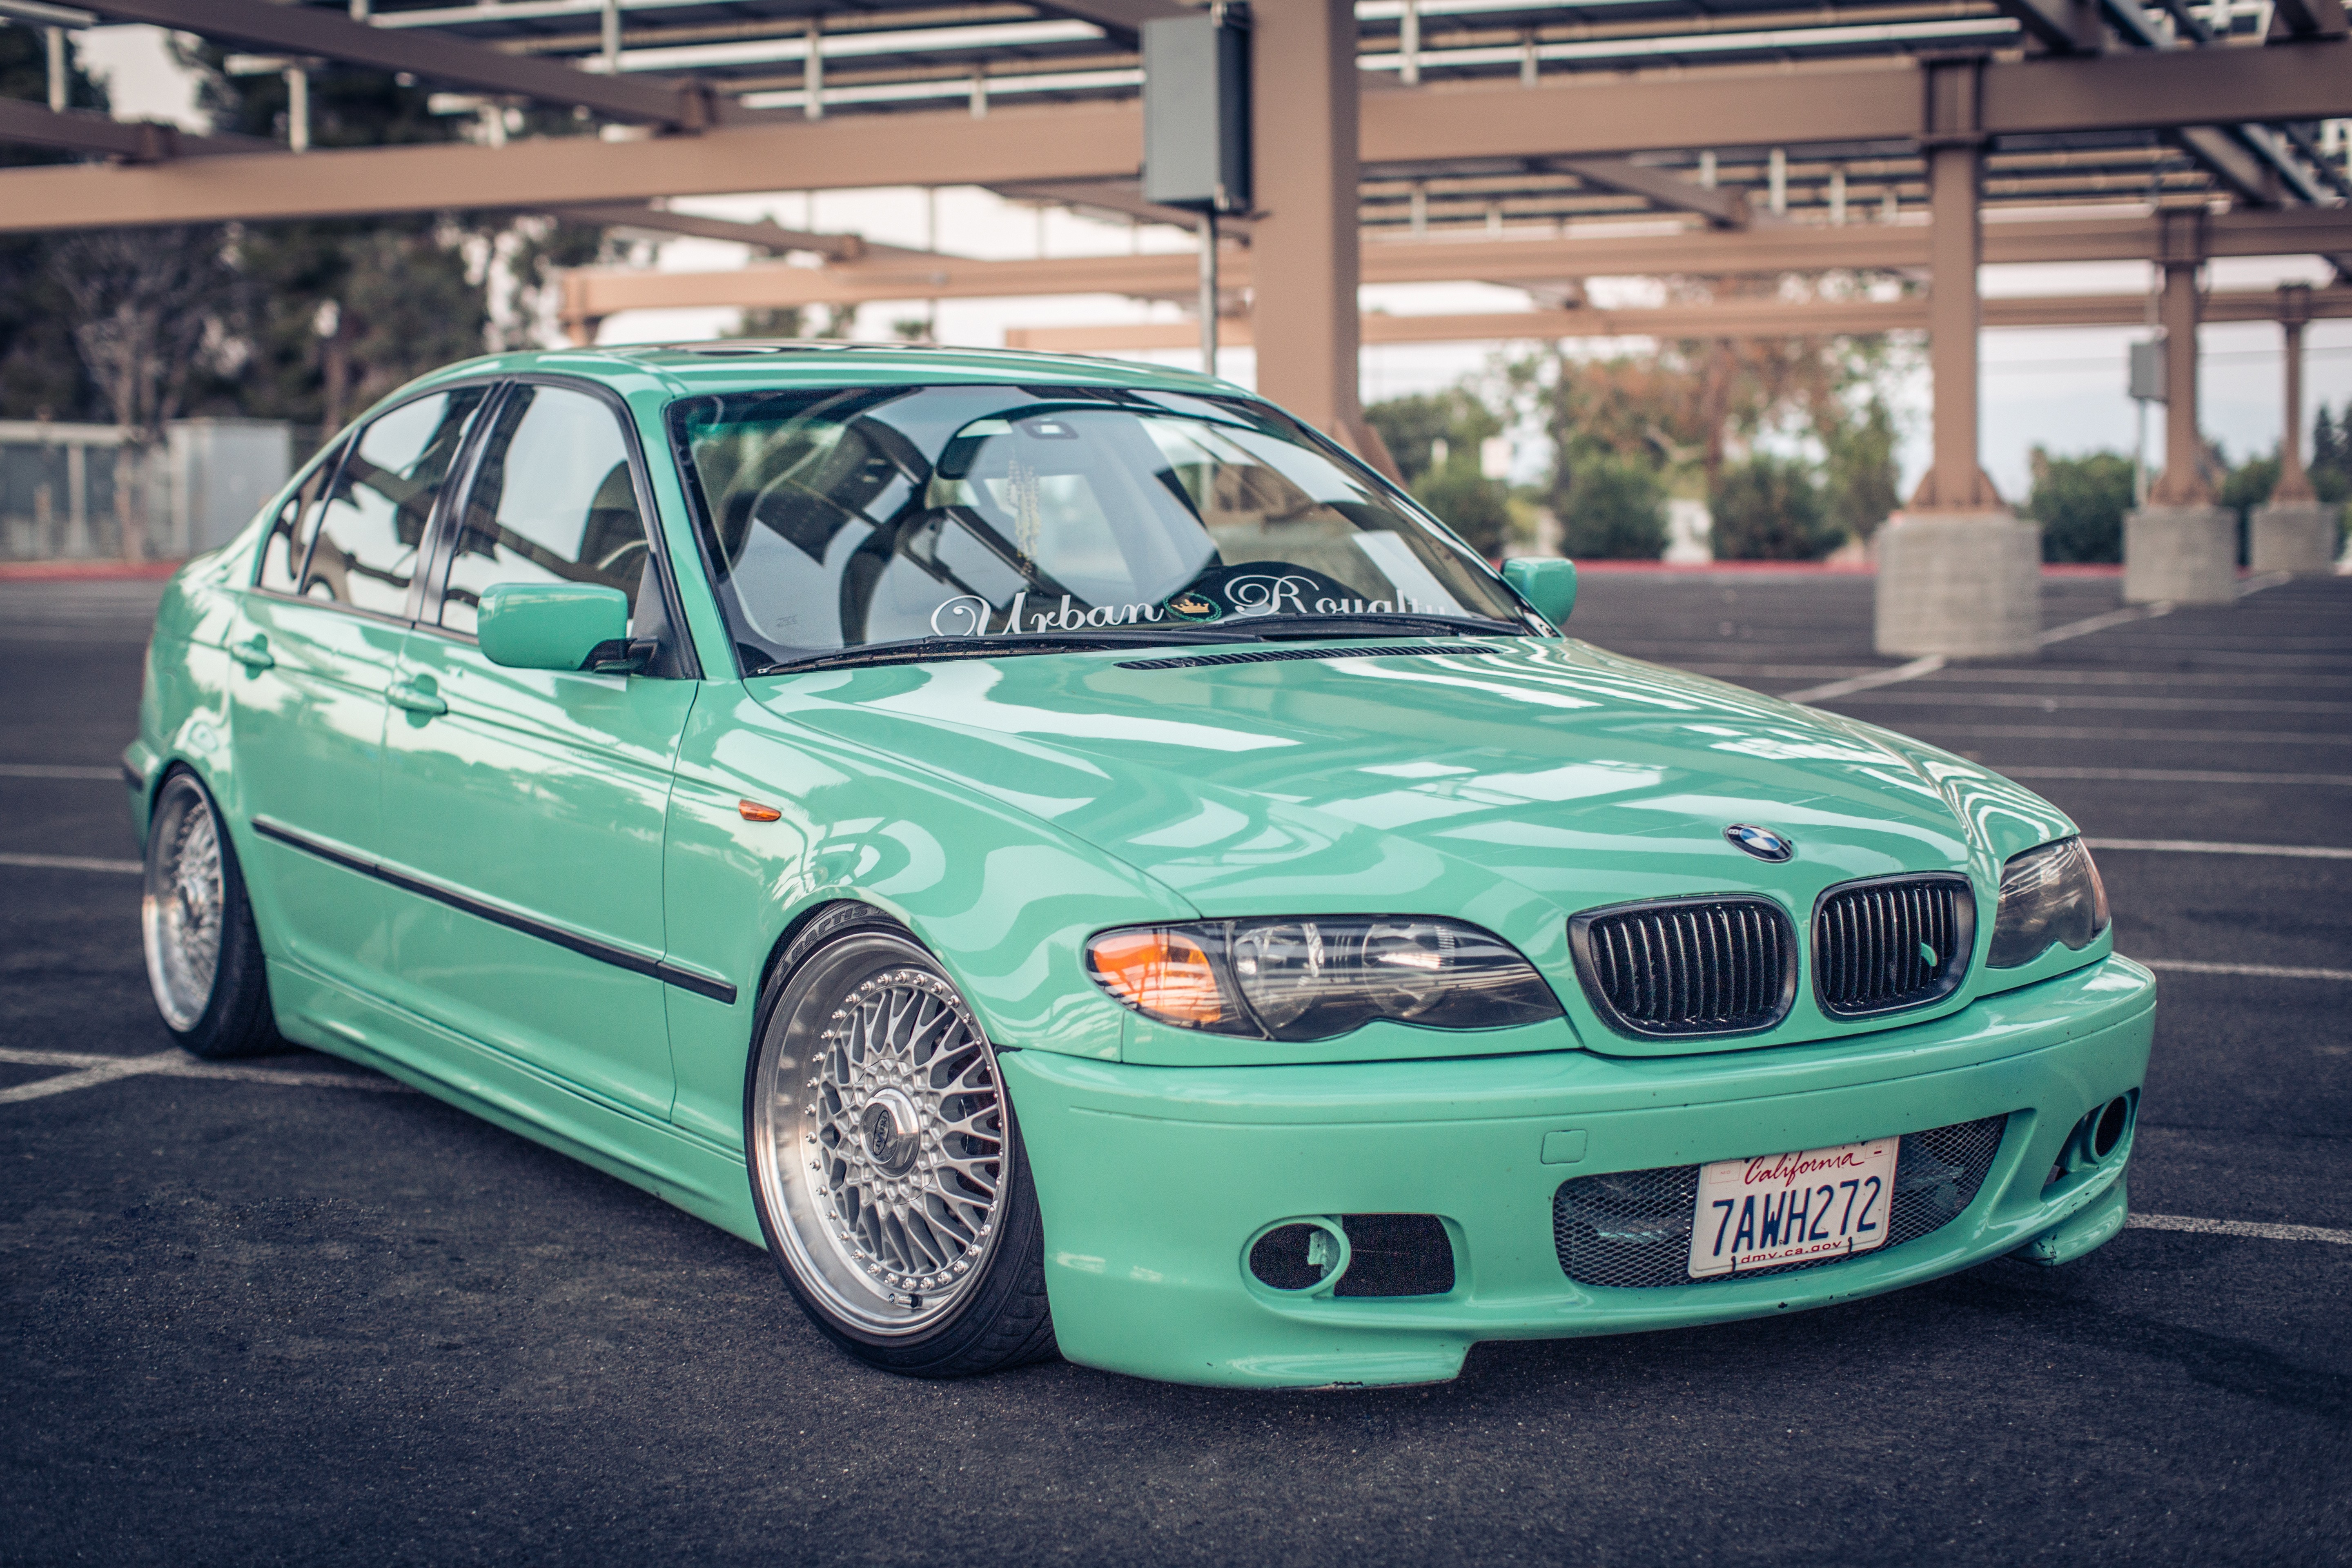 General 5760x3840 BMW BMW E46 BBS urban tuning stance (cars) speed triple green cars BMW 3 Series car vehicle numbers